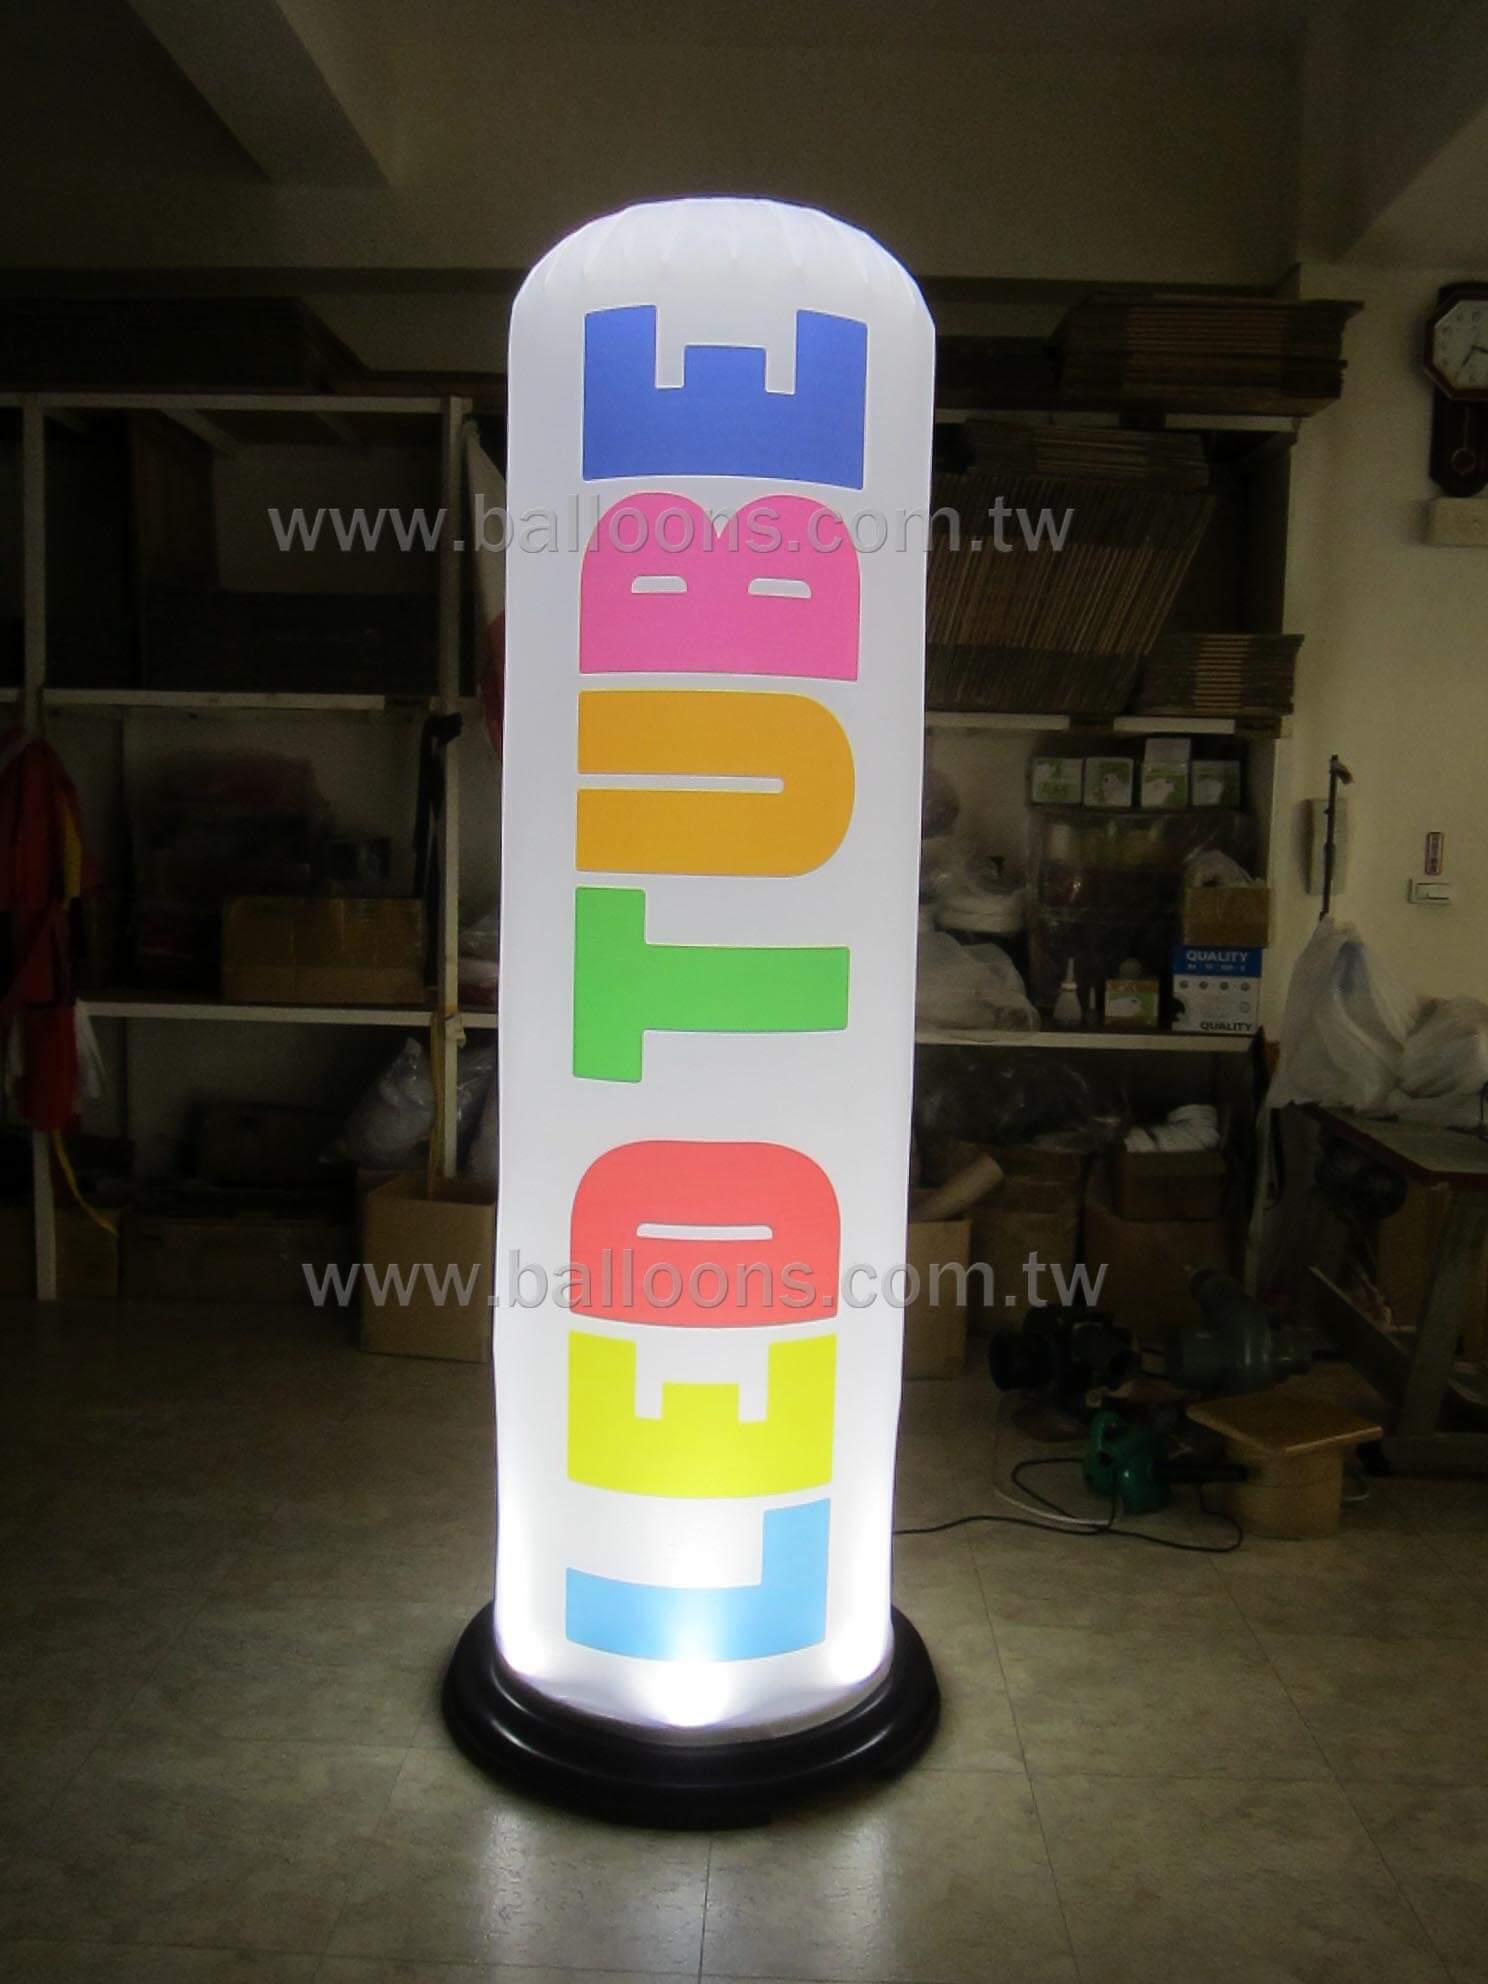 LED lighted plate for air filled advertising balloons持續充氣式發亮燈盤廣告氣球